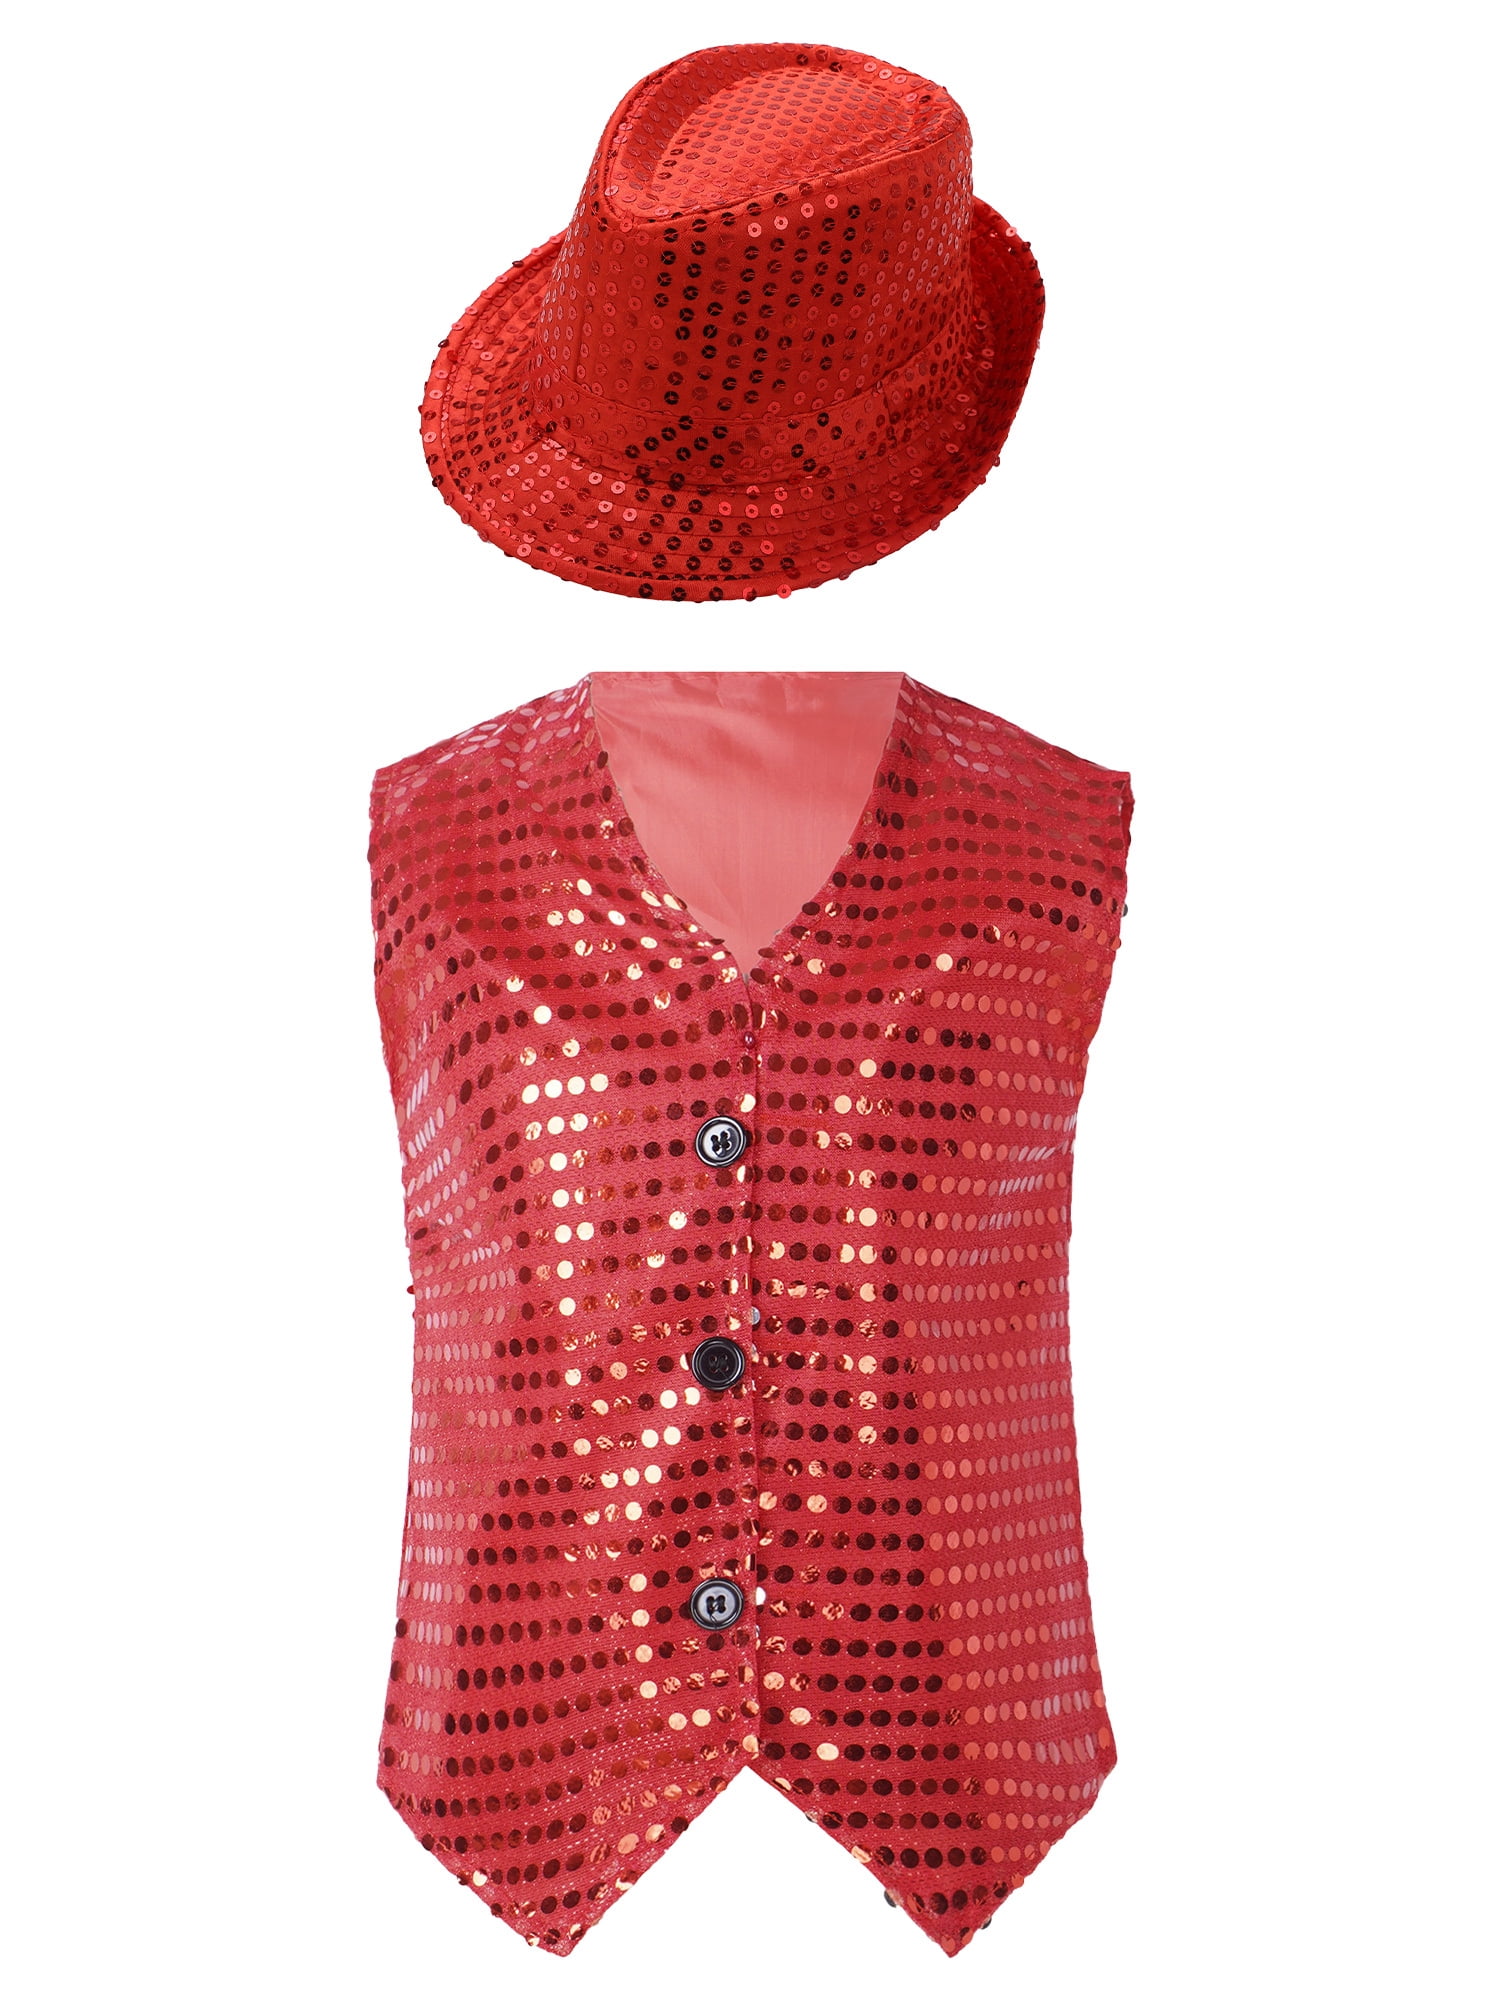 YEAHDOR Kids Boys Button Down Shiny Sequins Vest with Hat for Jazz Hip ...